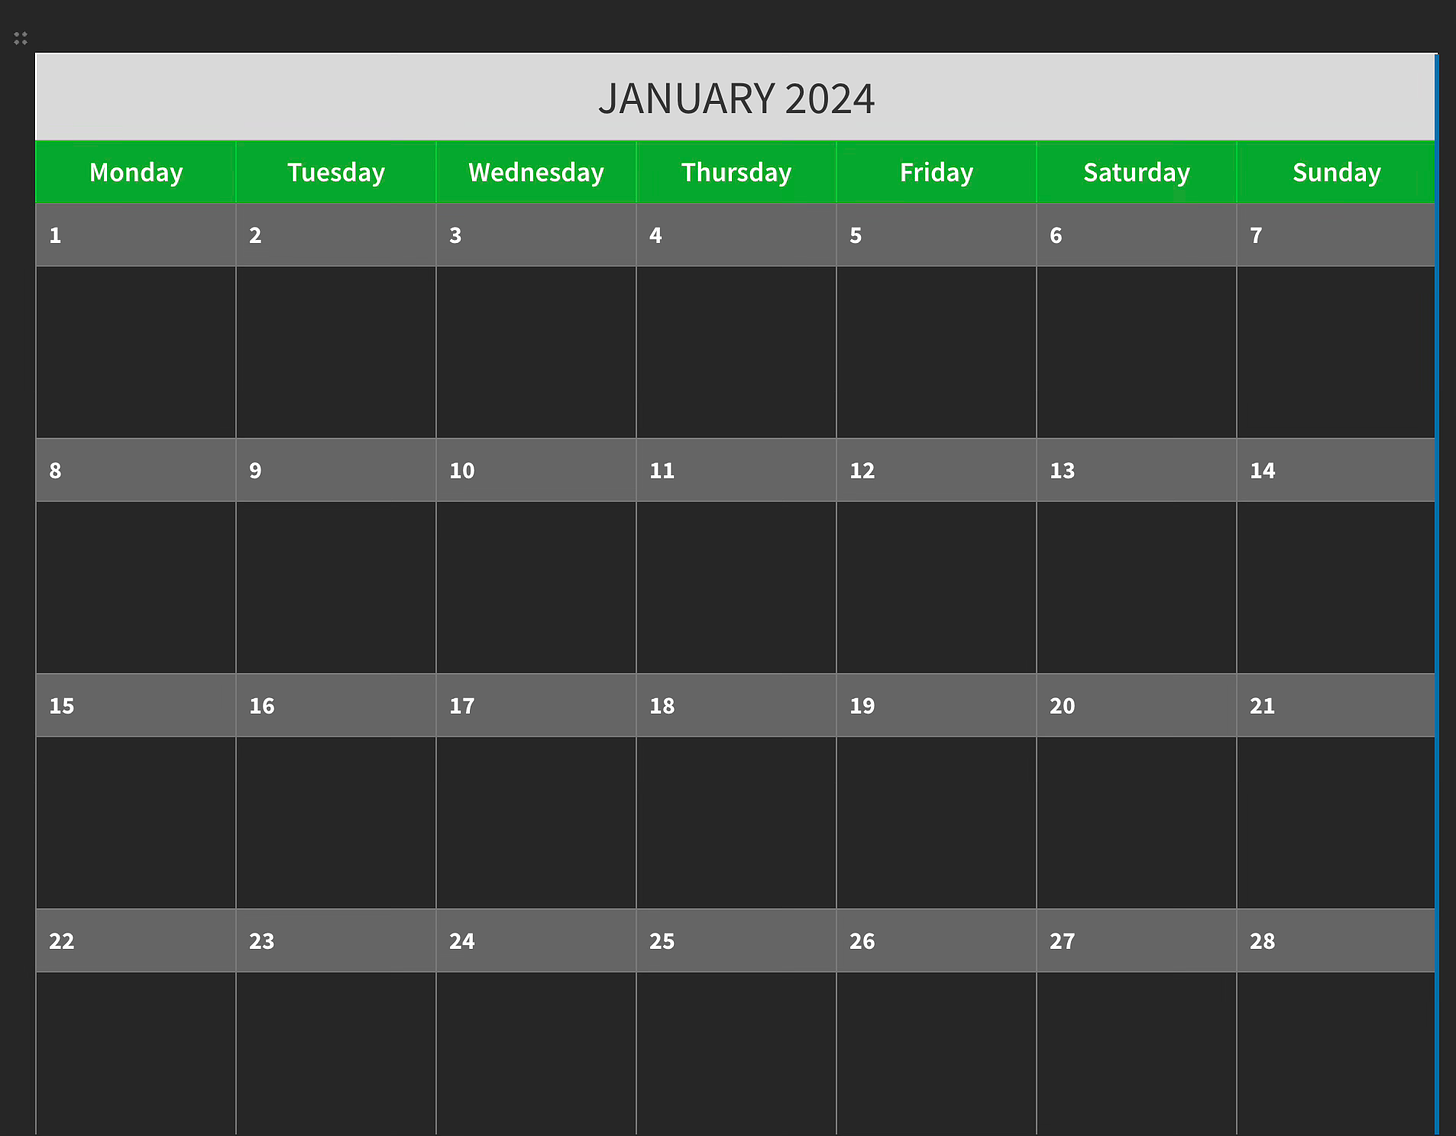 Free Evernote Template 2024 Monthly Calendar starting Monday